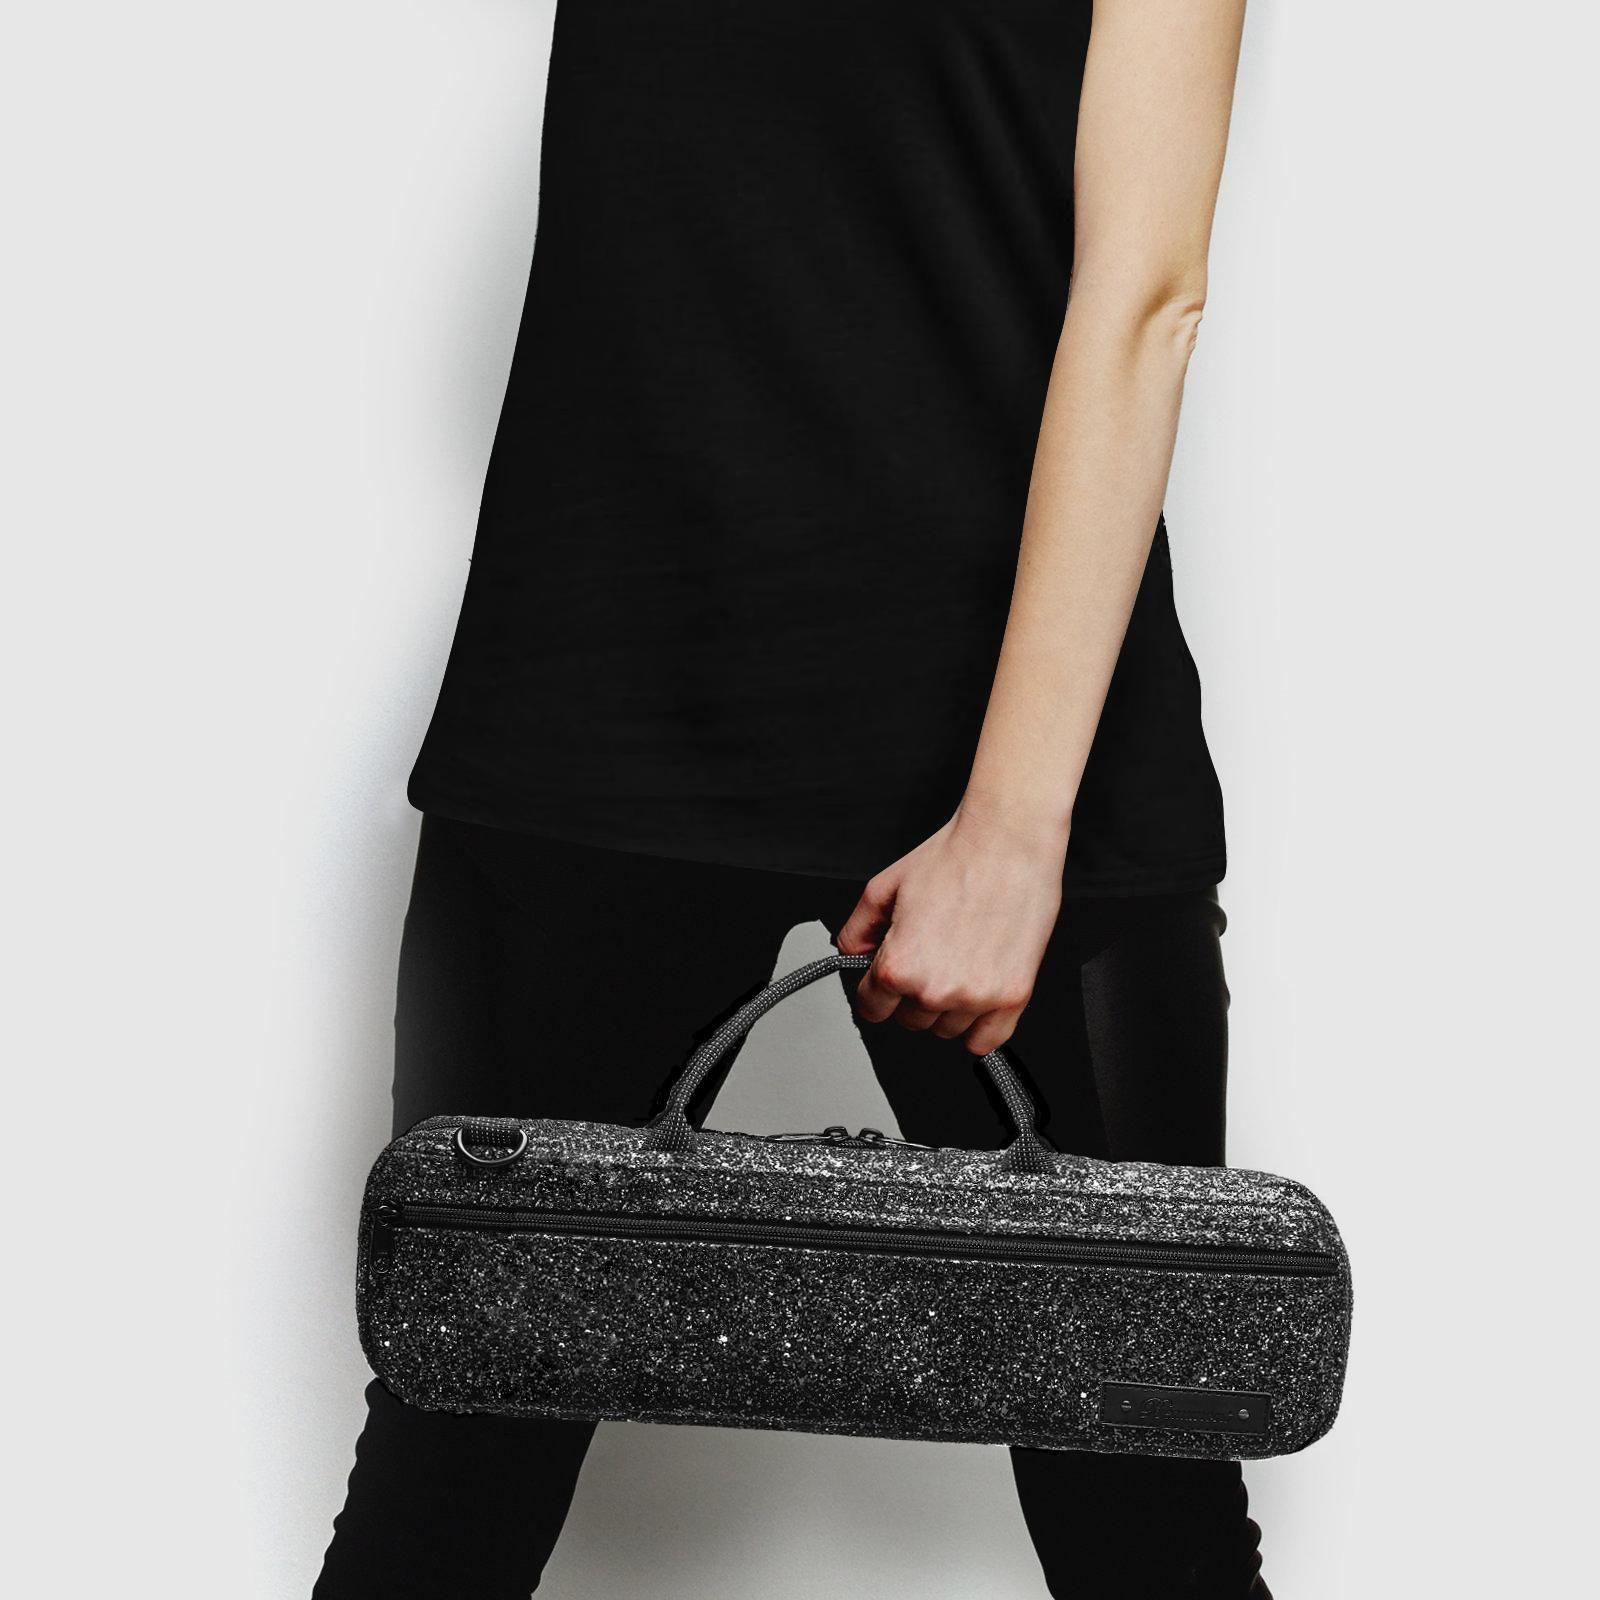 Beaumont Instrument Logo - Black Sparkle B-foot Flute Bag | Beaumont Music | Stylish, Fun and ...